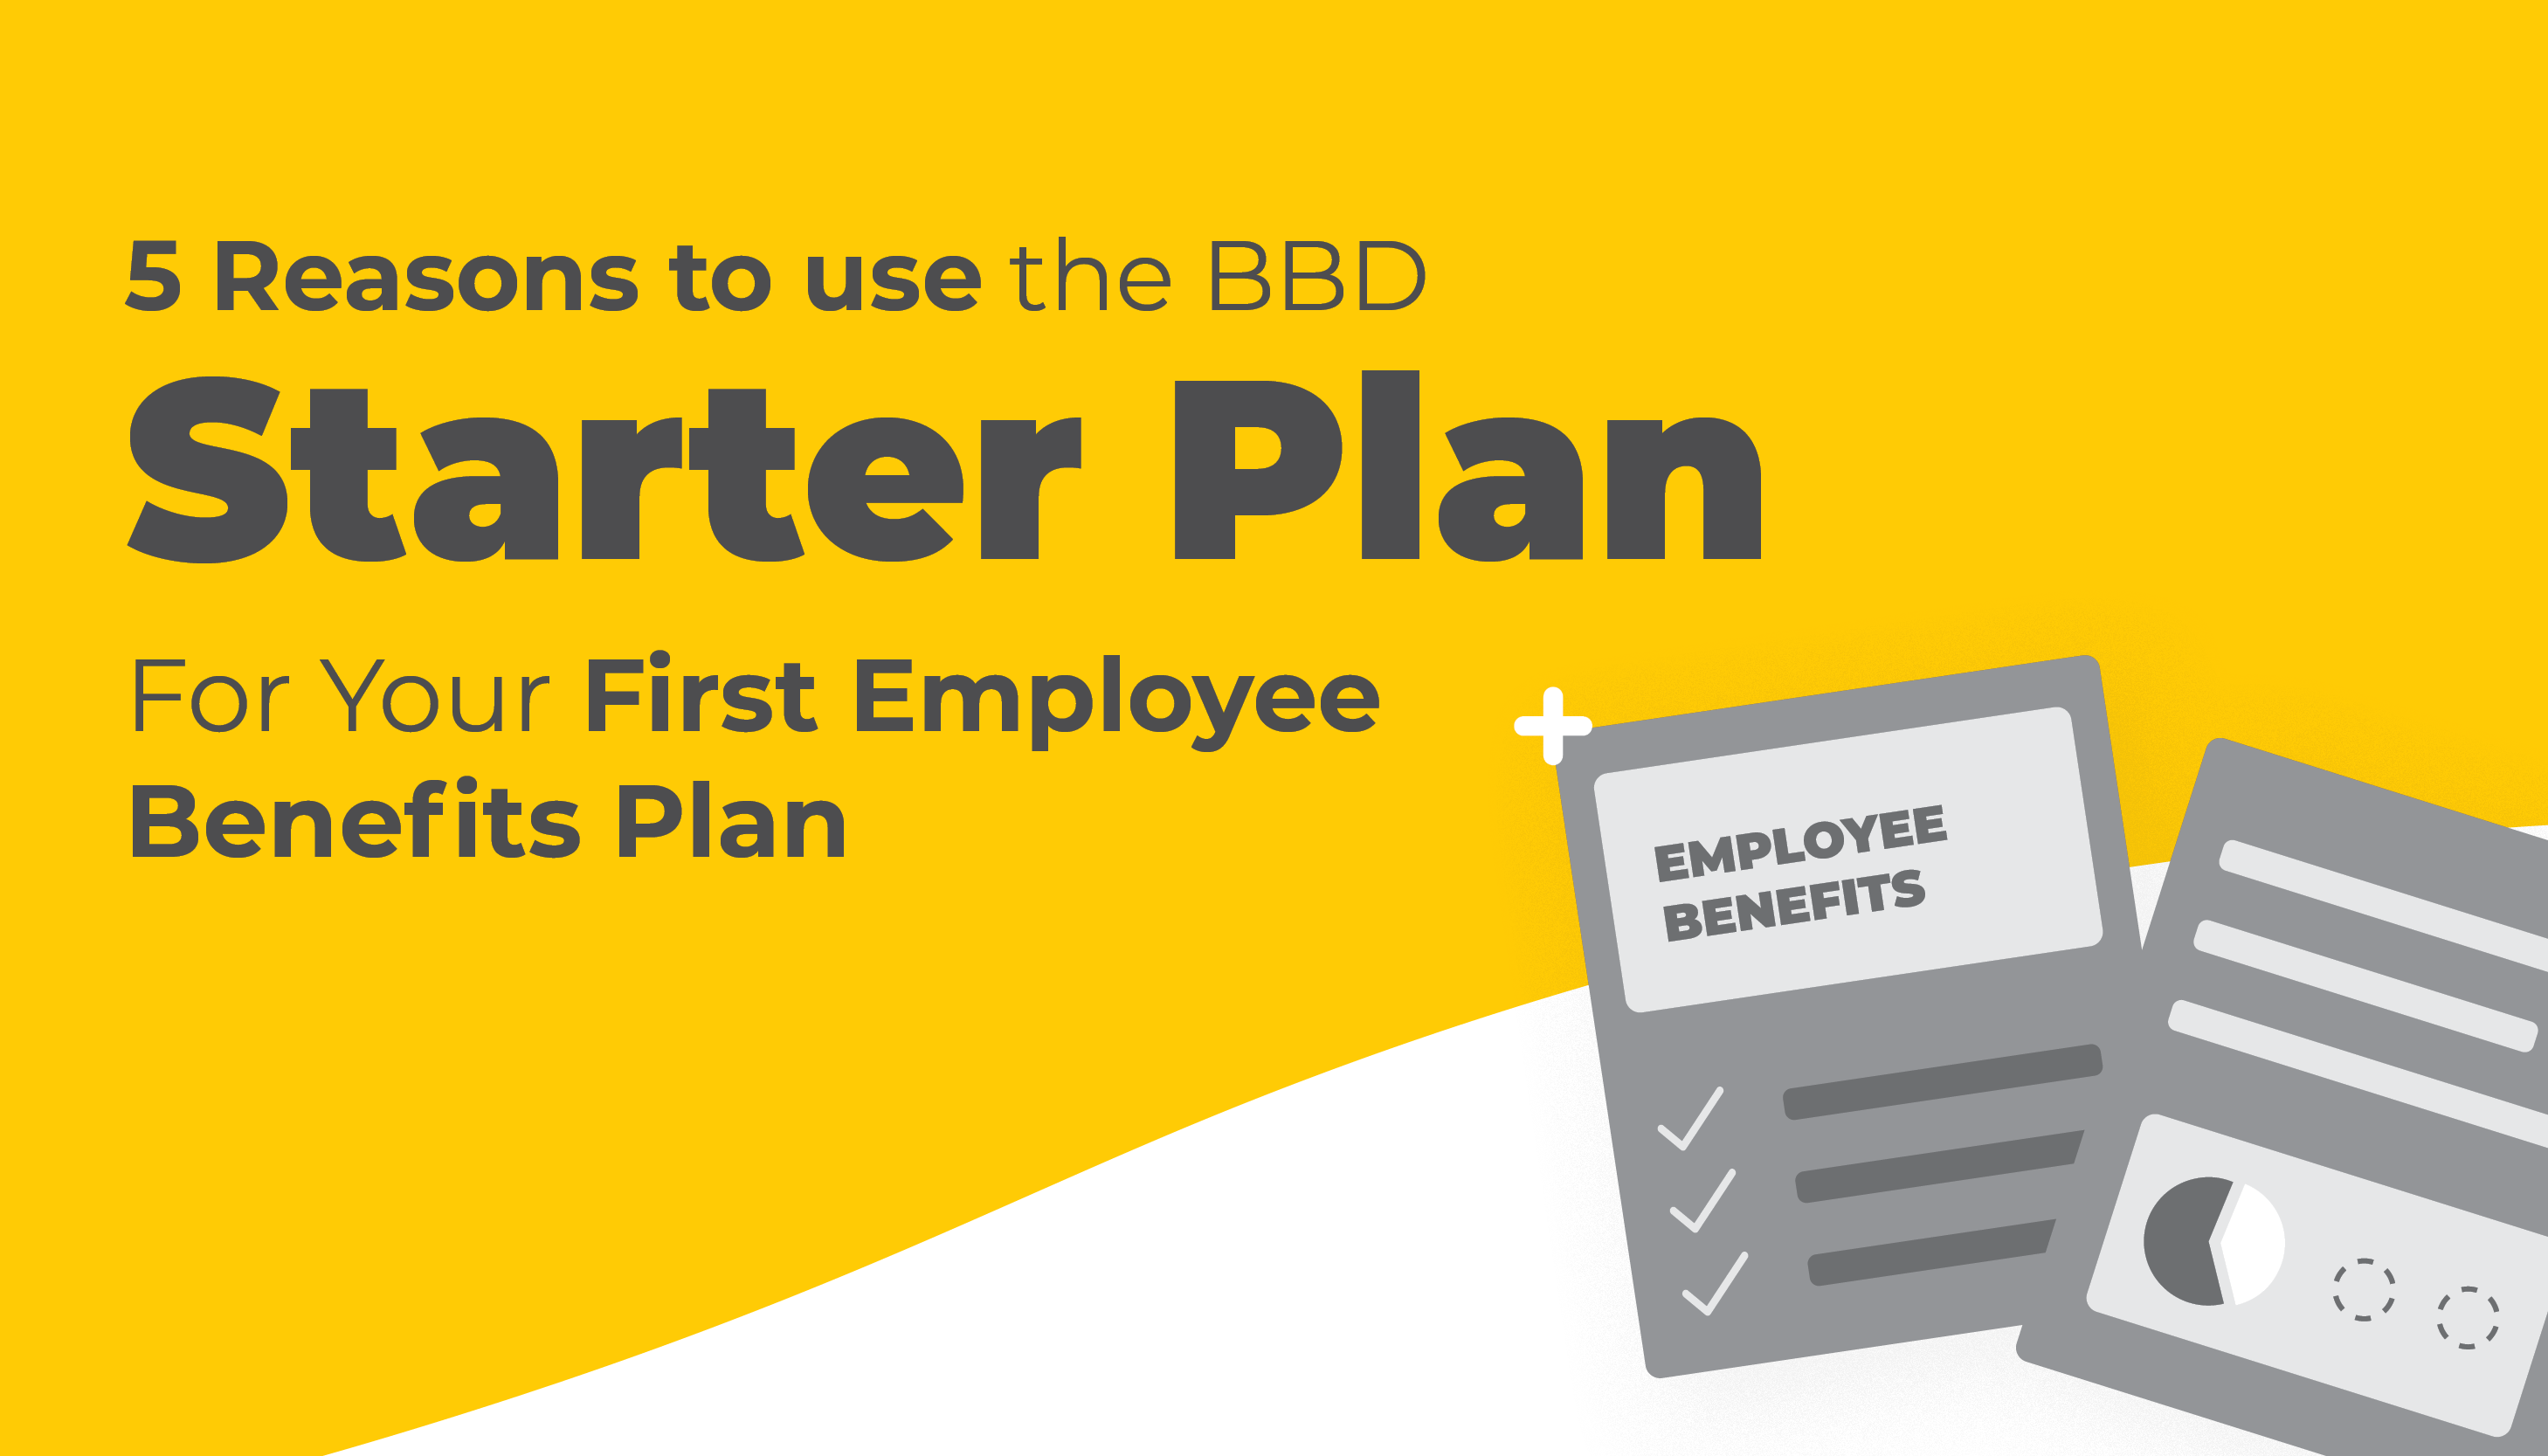 5 Reaspons to Use the BBD Starter Plan for Your First Employee Benefits Plan | Benefits by Design